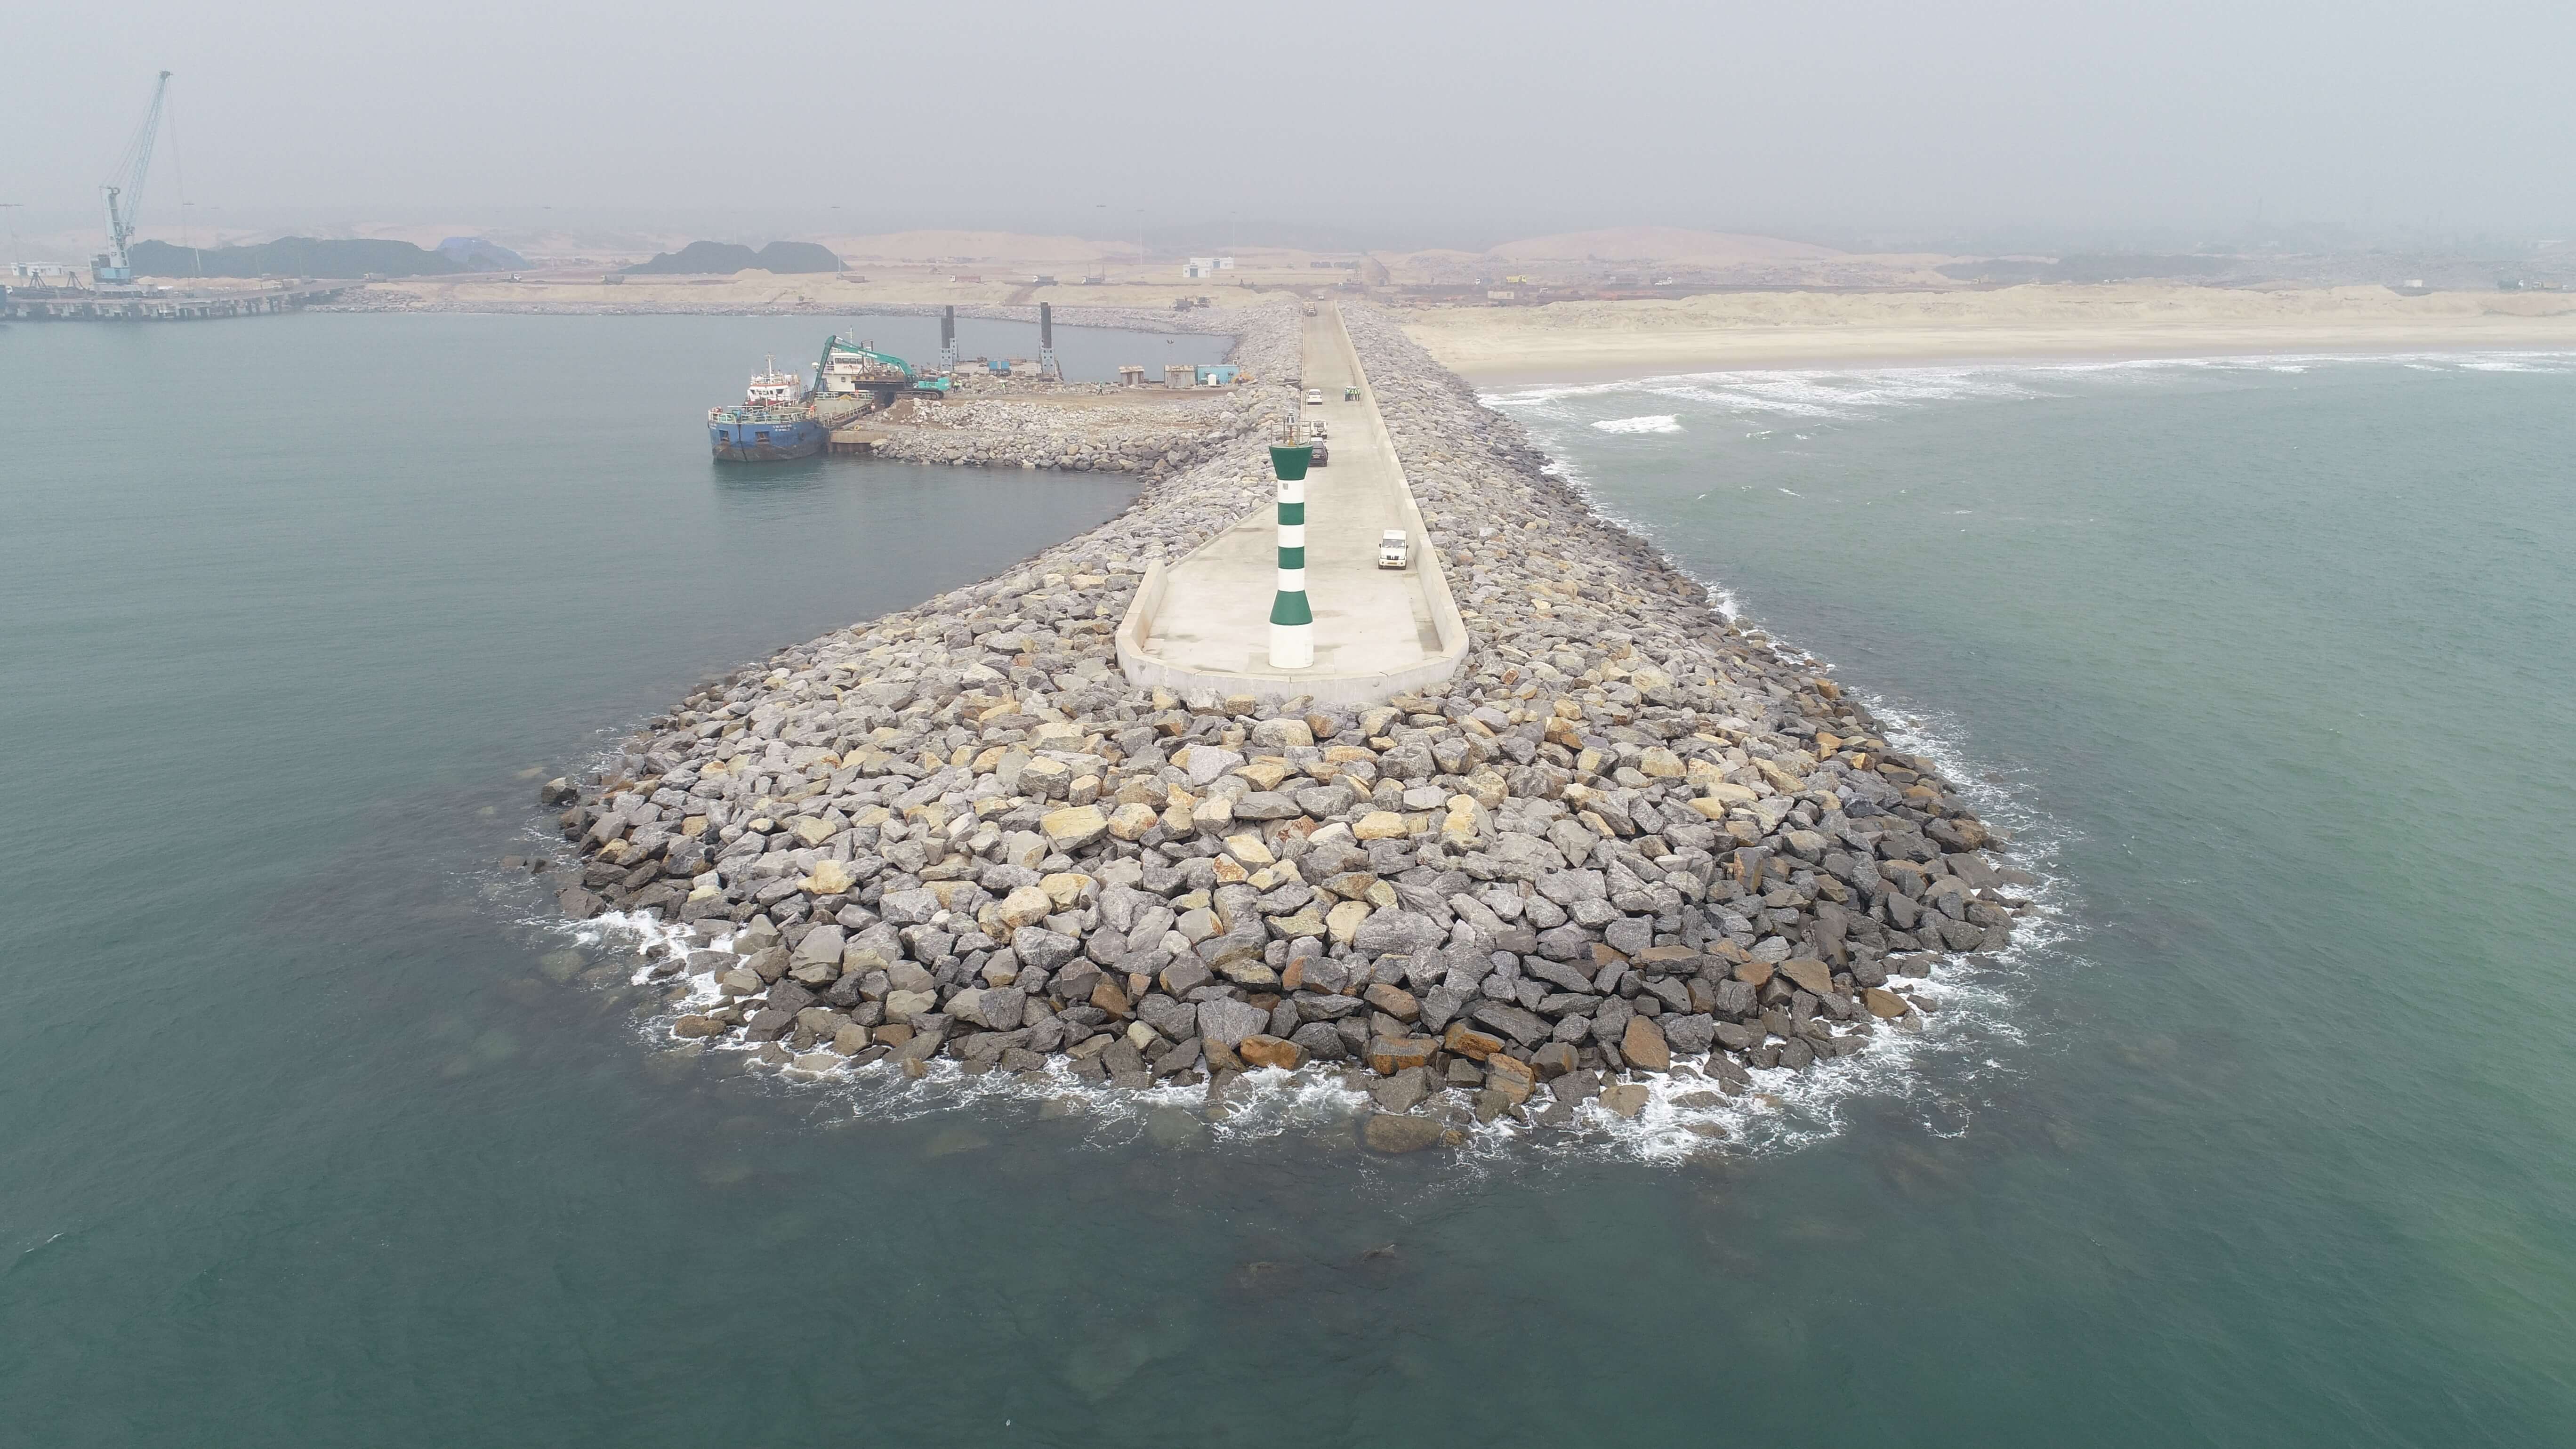 The intermediate breakwater was constructed by Afcons within a year